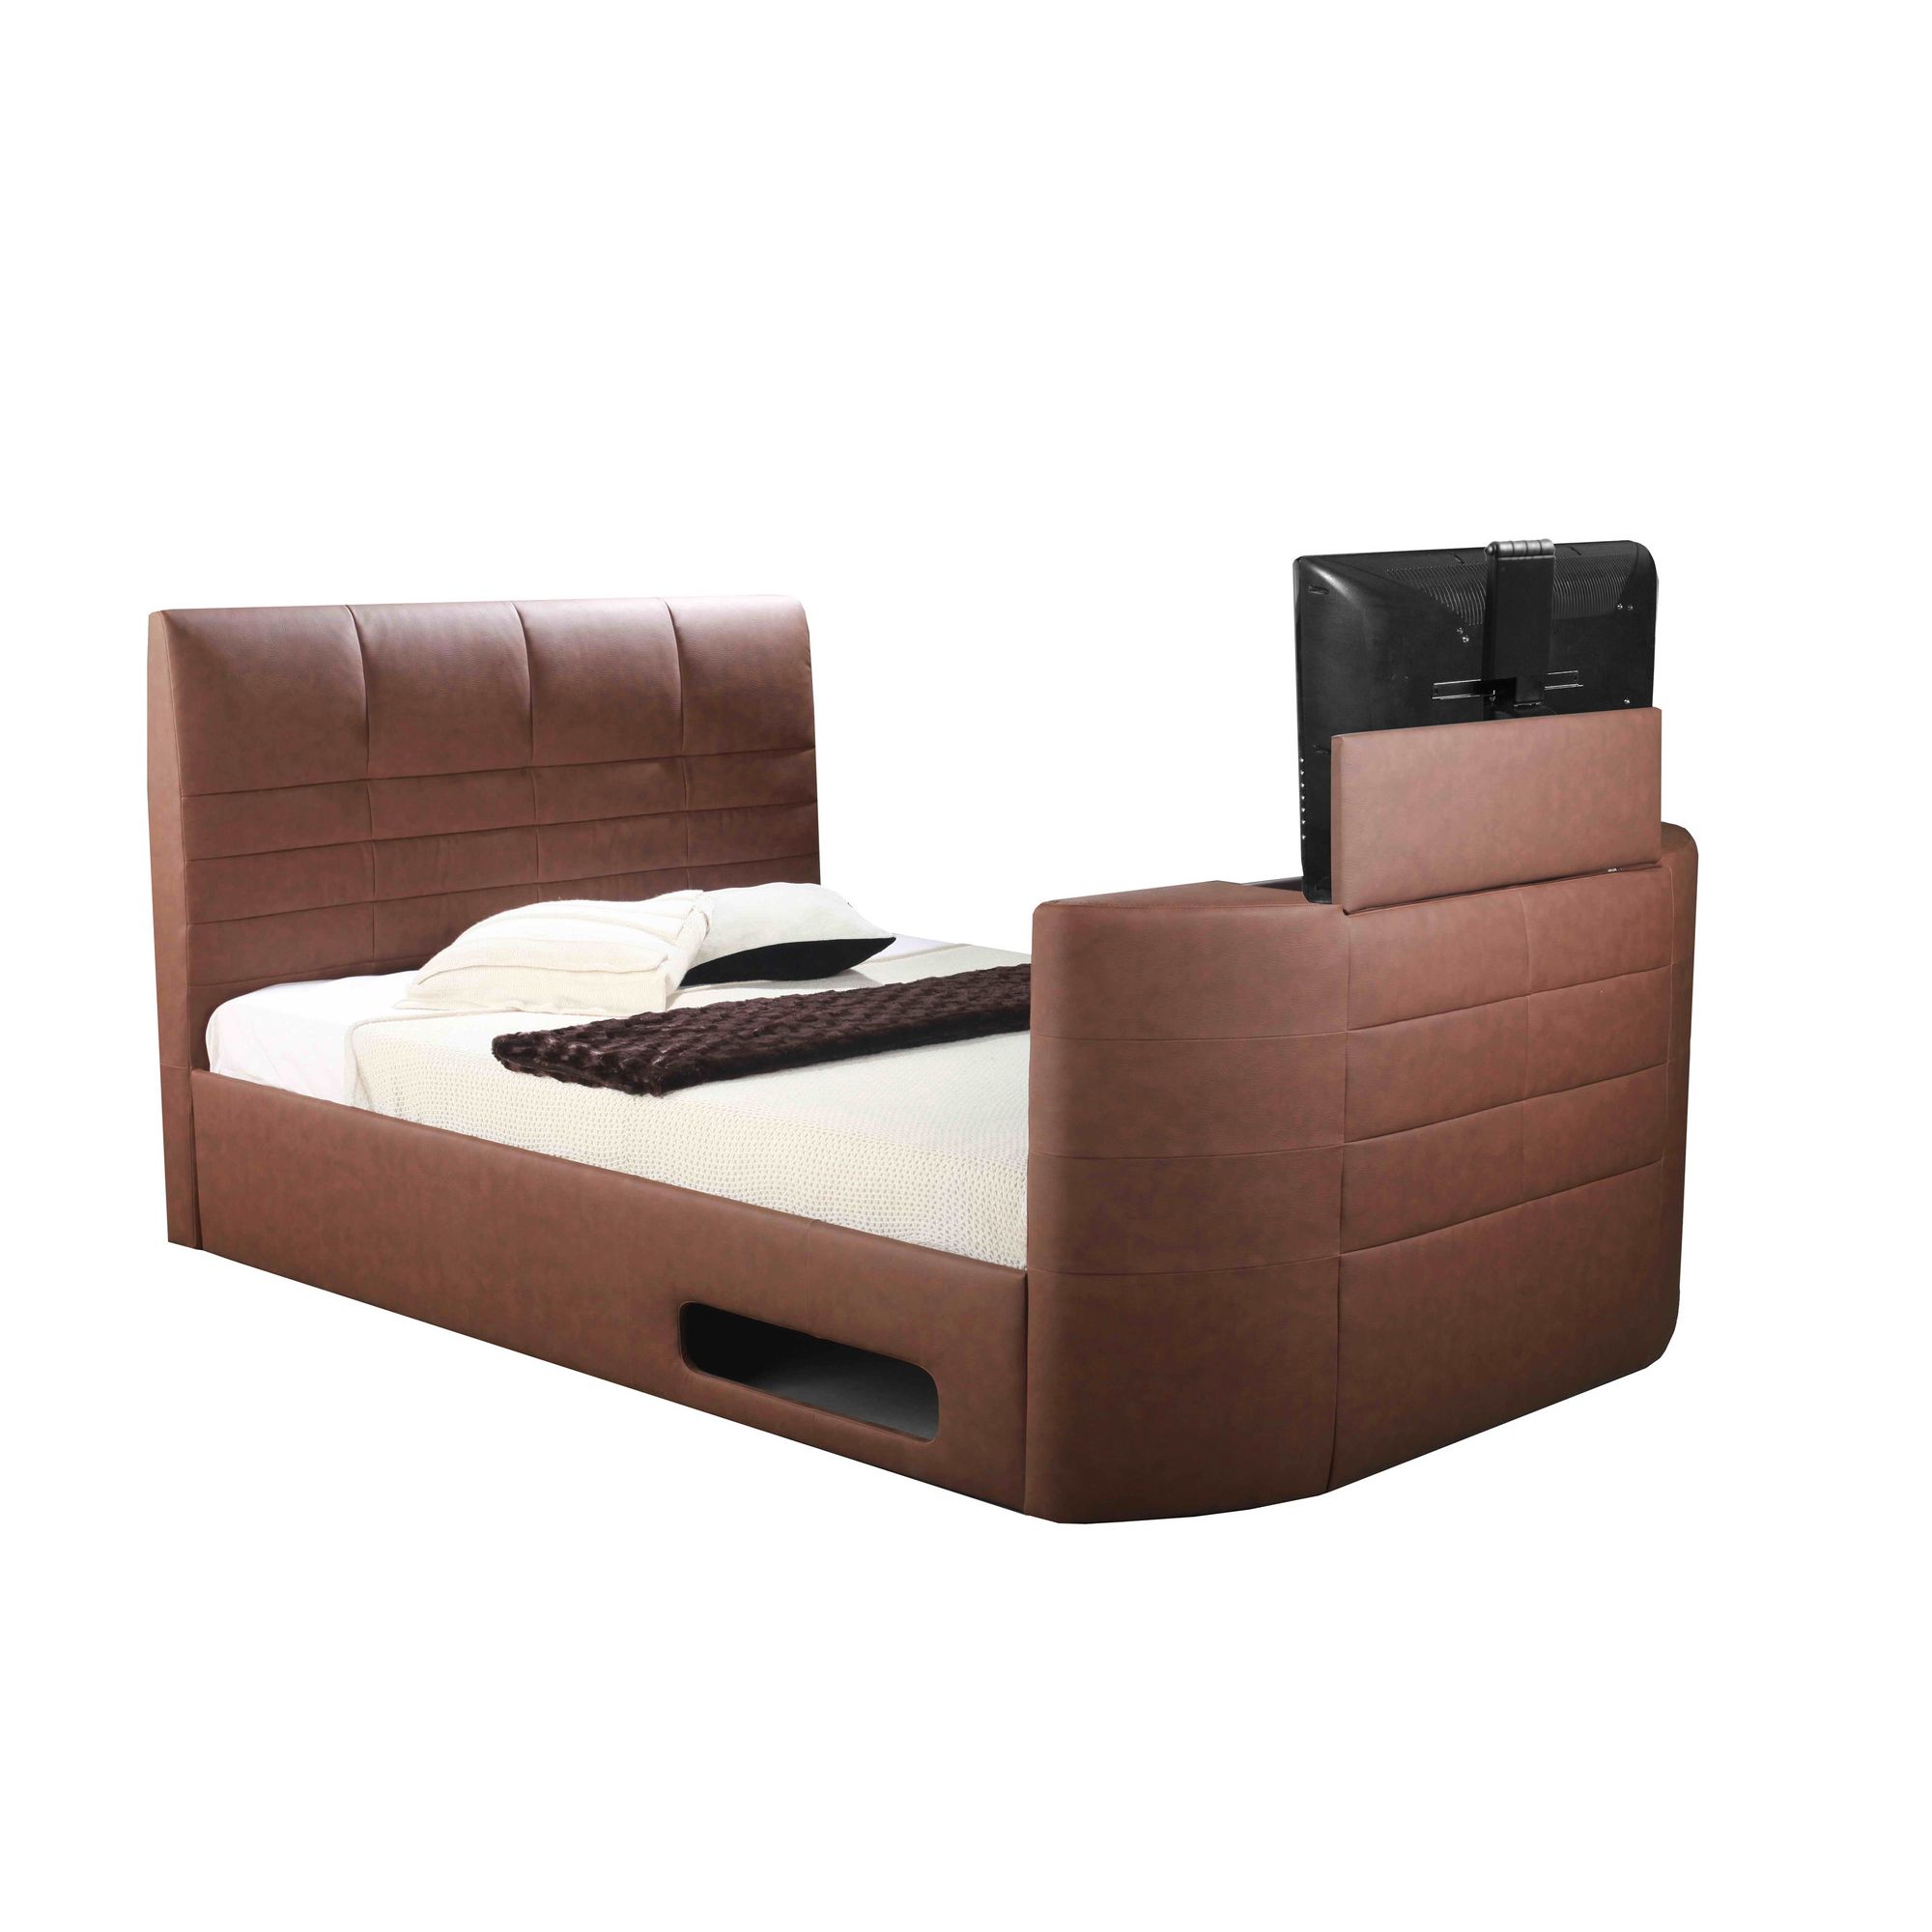 Altruna Miami TV Bed - King - Without Ottoman Storage at Tesco Direct